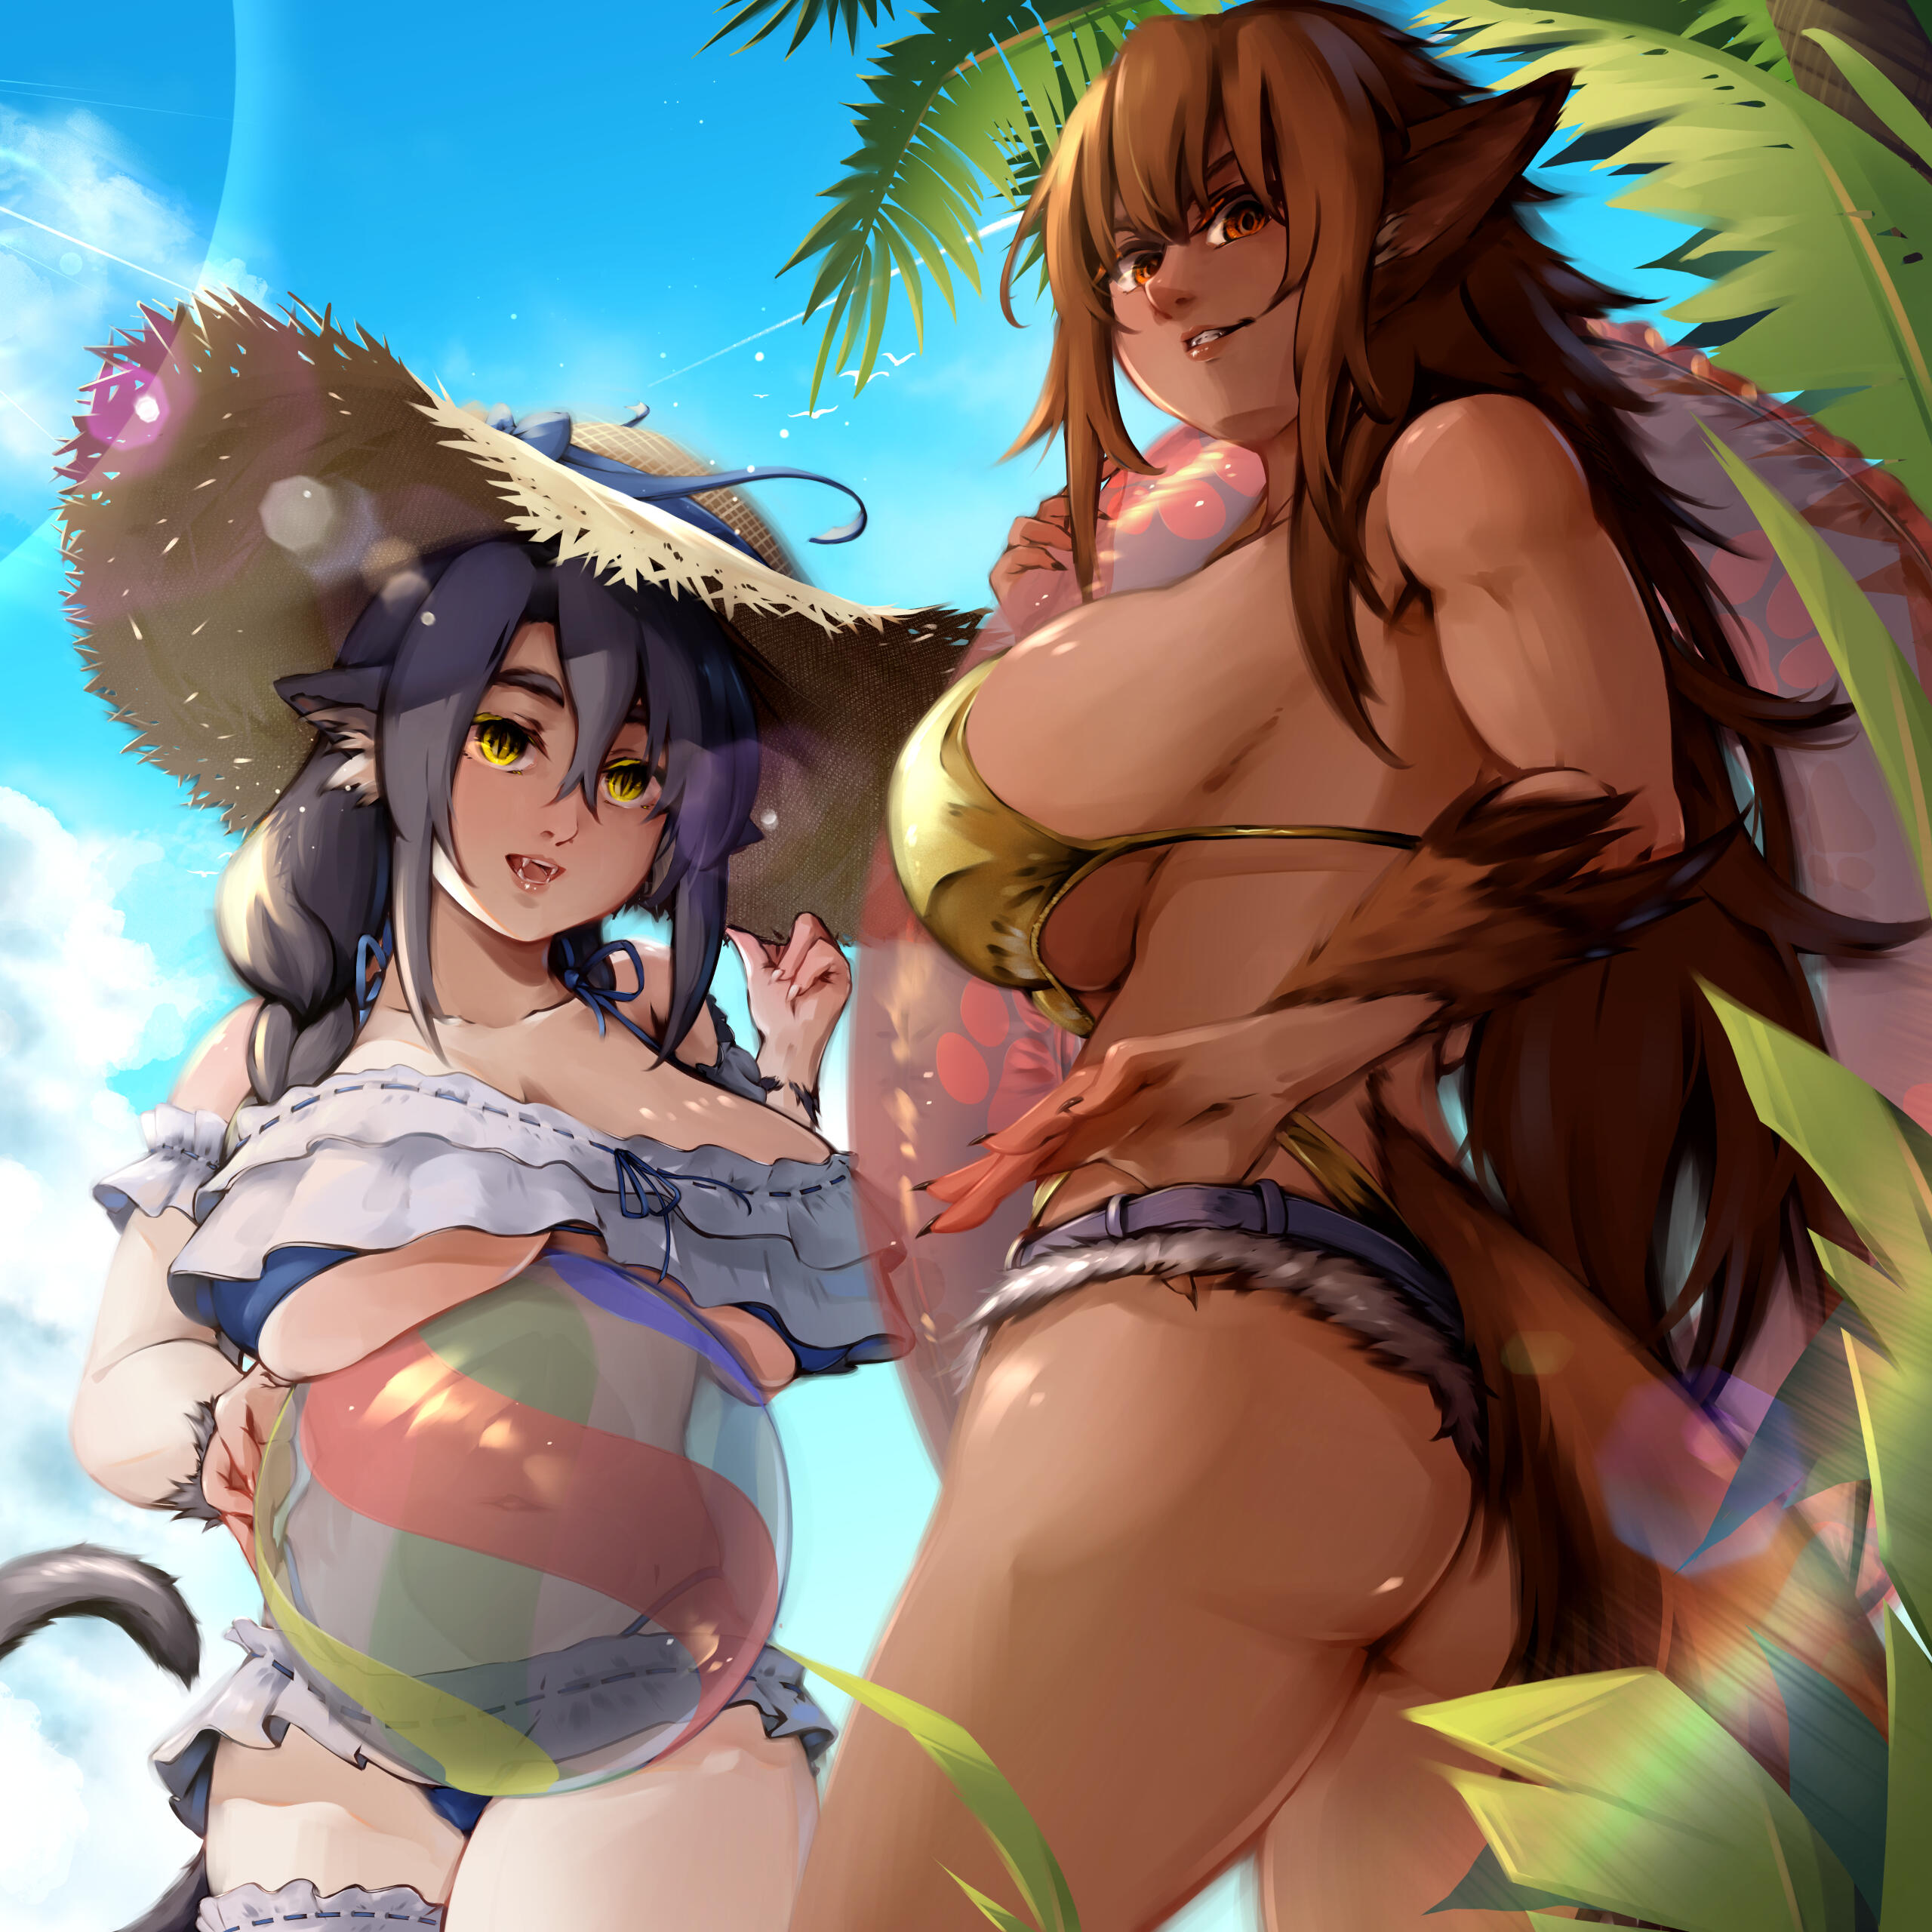 Digital art of Melissa & Larissa Manda at the beach. Melissa is wearing a ribbon-trimmed white/blue bikini and a large straw hat, while Larissa is wearing a golden bikini with micro shorts jeans. Both are looking at the viewer smiling.